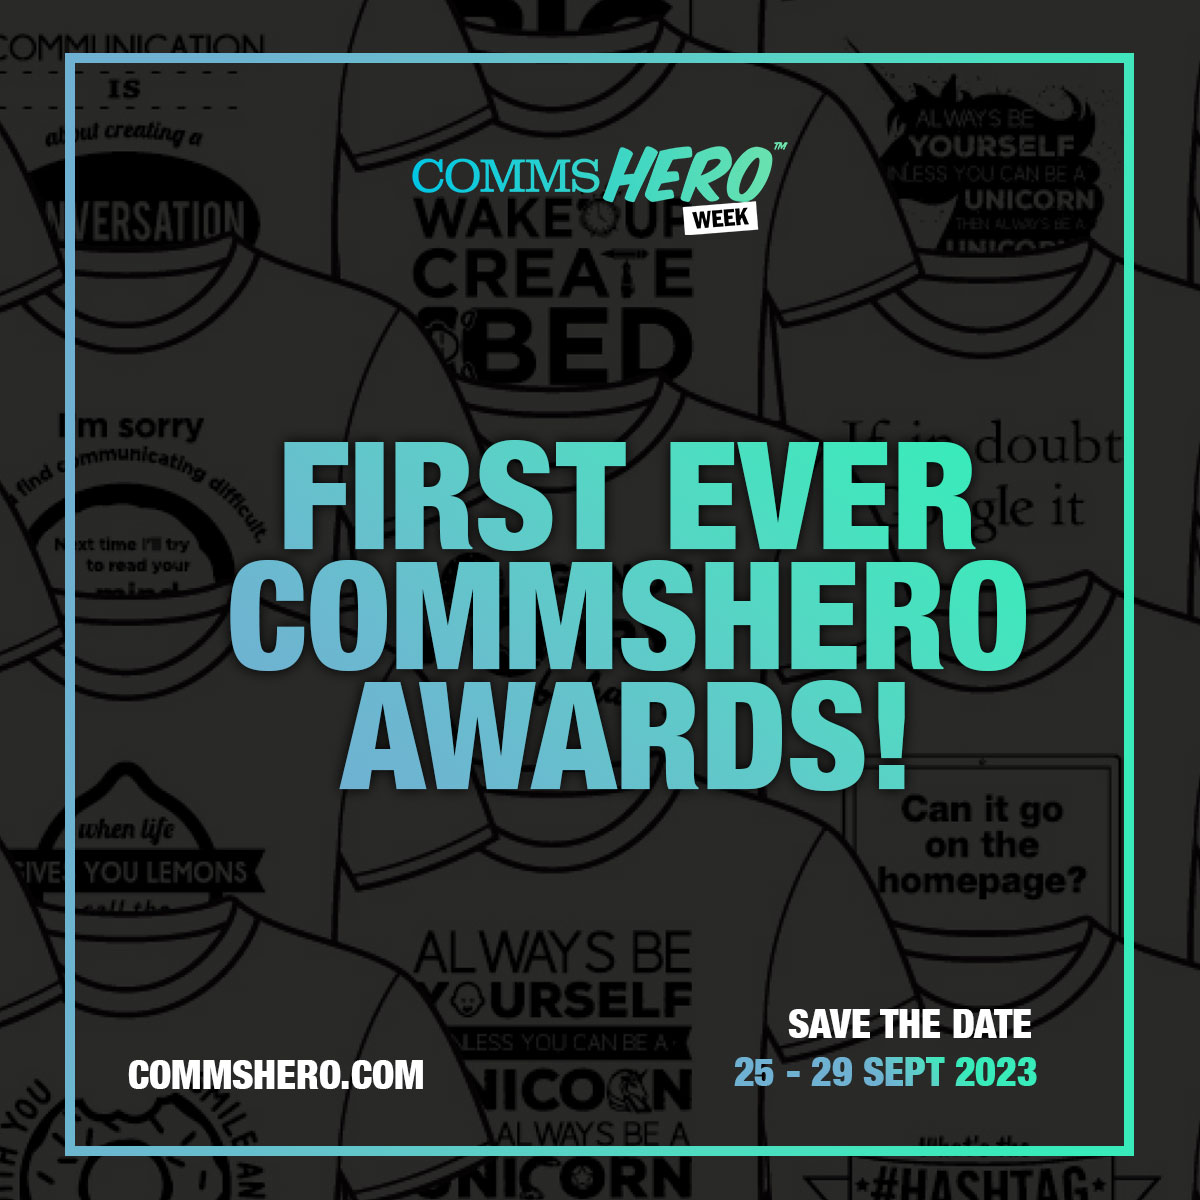 Introducing...#CommsHero awards!🏆

As part of CommsHero week 2023, we will be hosting our FIRST EVER awards during the in-person day in Manchester - WOOP! 

Details on the categories & how to enter will be revealed soon...👀

More info on the event here: tinyurl.com/rw3akzer